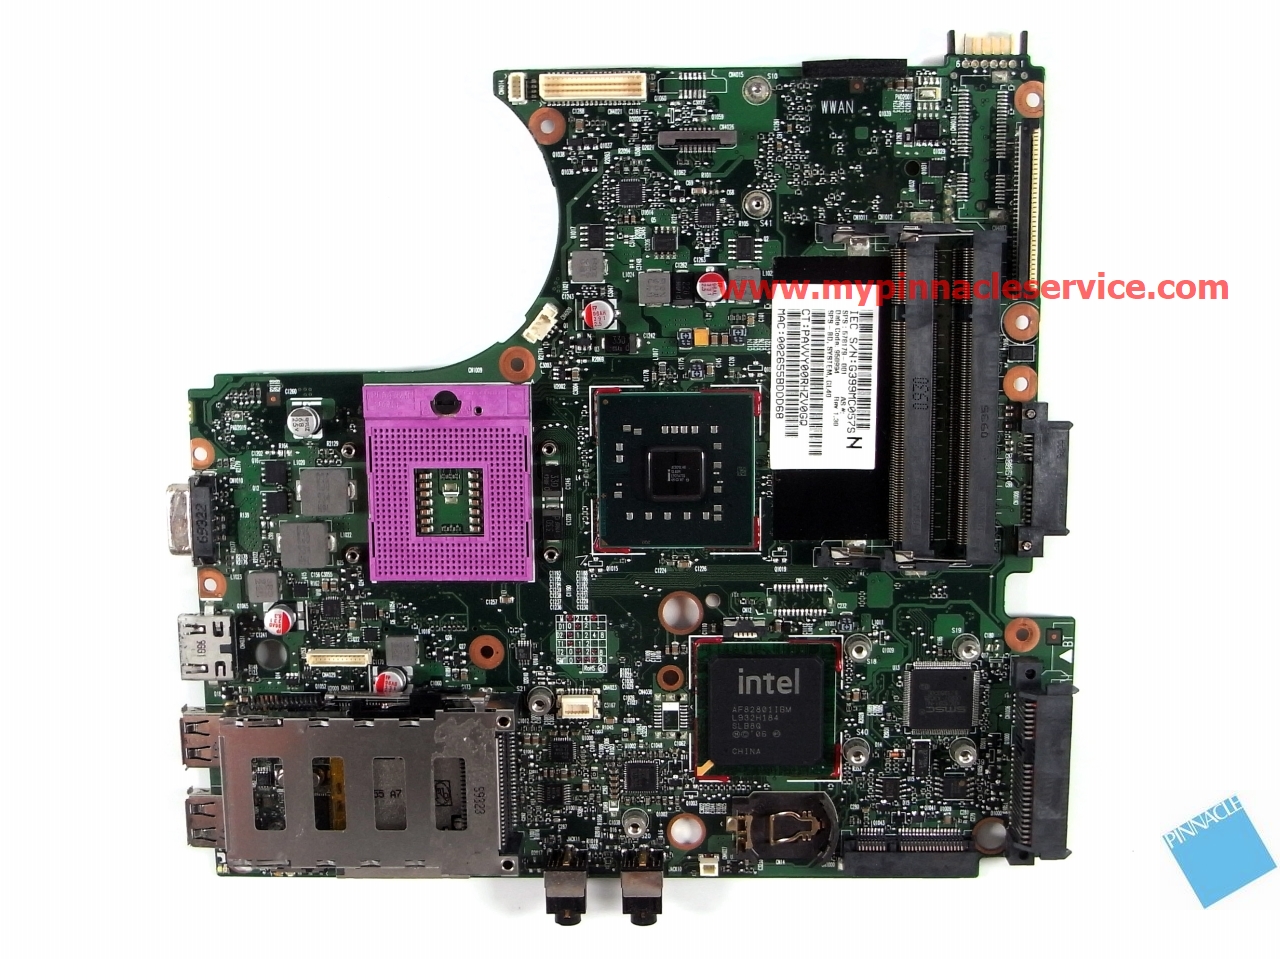 578179-001-motherboard-for-hp-comaq-4510s-4311s-4411s-4410s-6050a2252601-r0010749.jpg